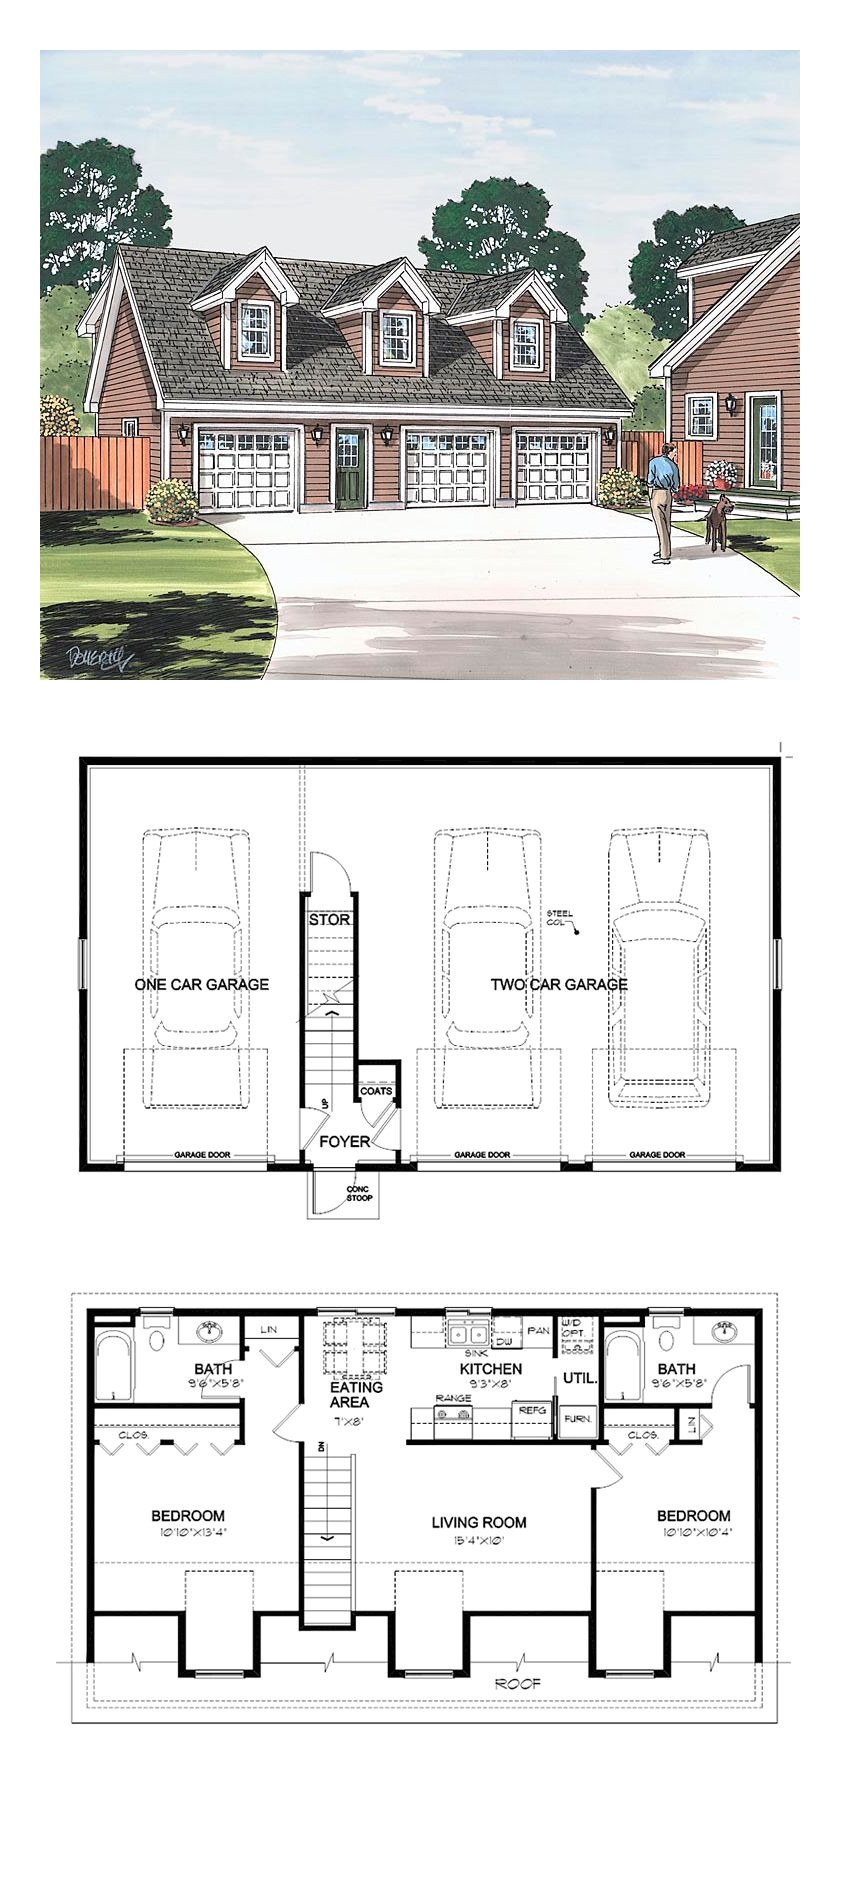 garage apartment plan 30032 total living area 887 sq ft 2 bedrooms and 2 bathrooms garage area 1068 sq ft carriagehouse